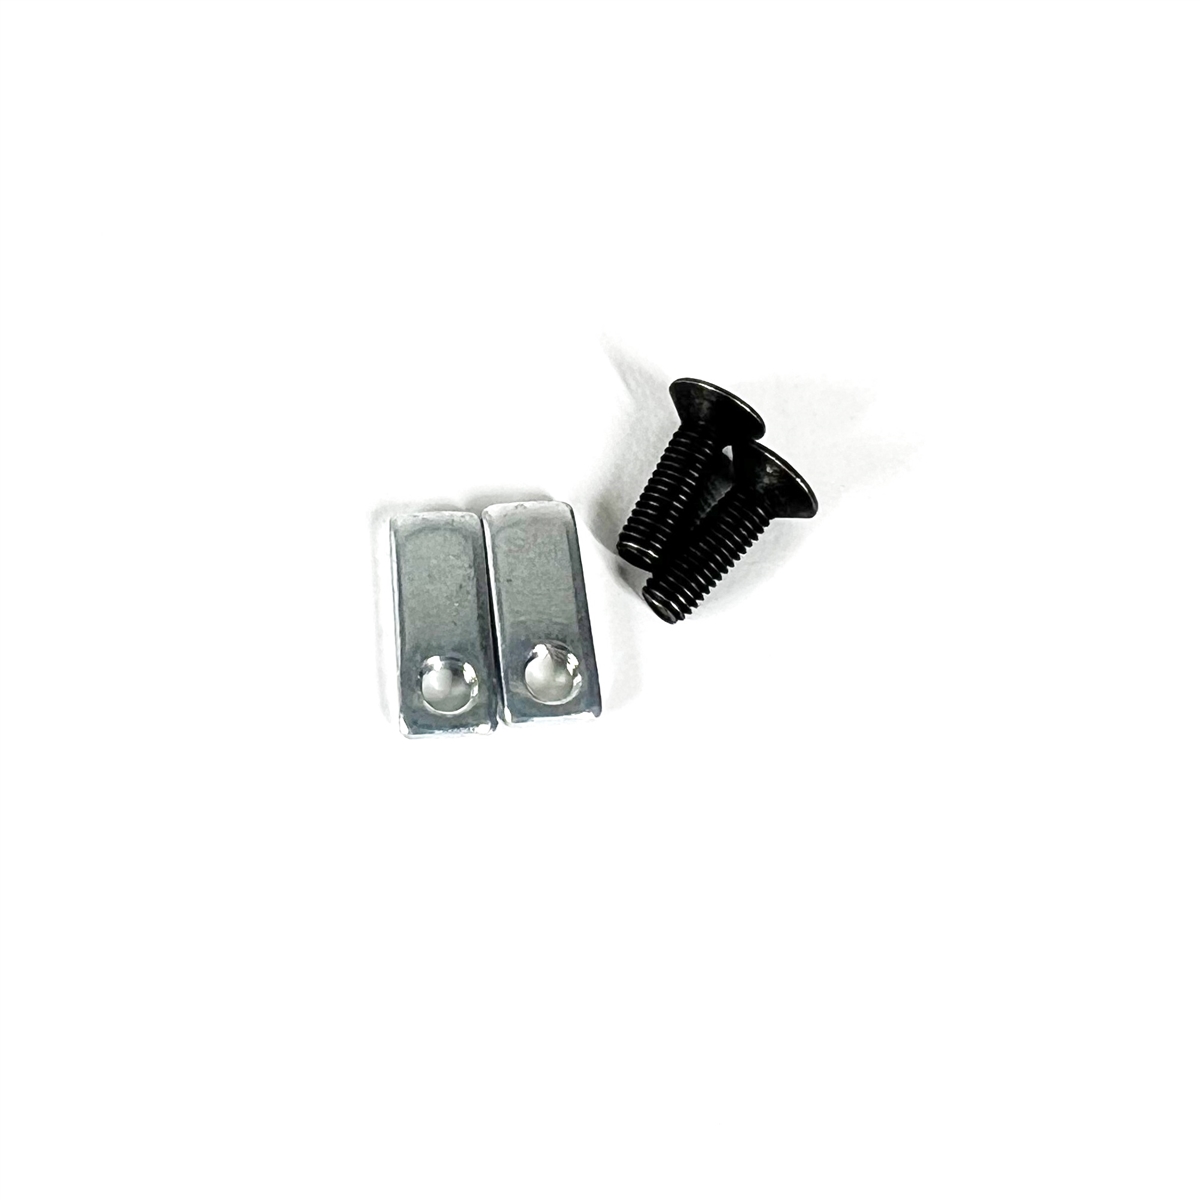 Plates and screws for fixing battery cover Jam2 models from 2022